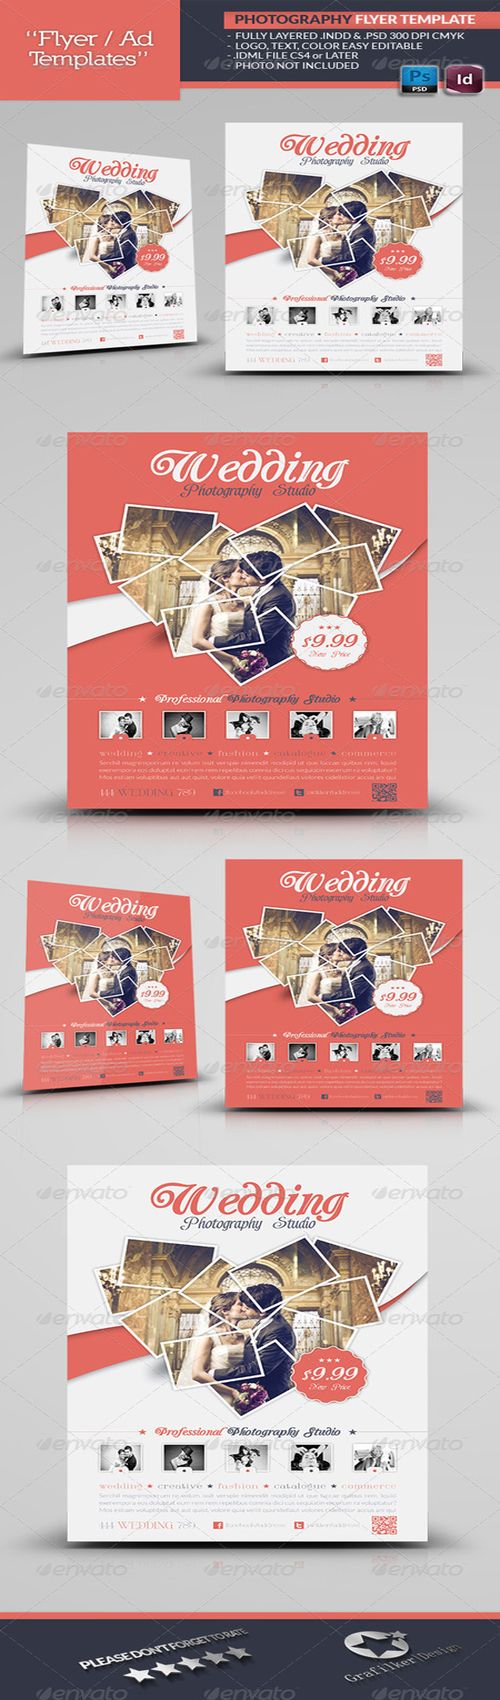 PSD - Photography Flyer Template